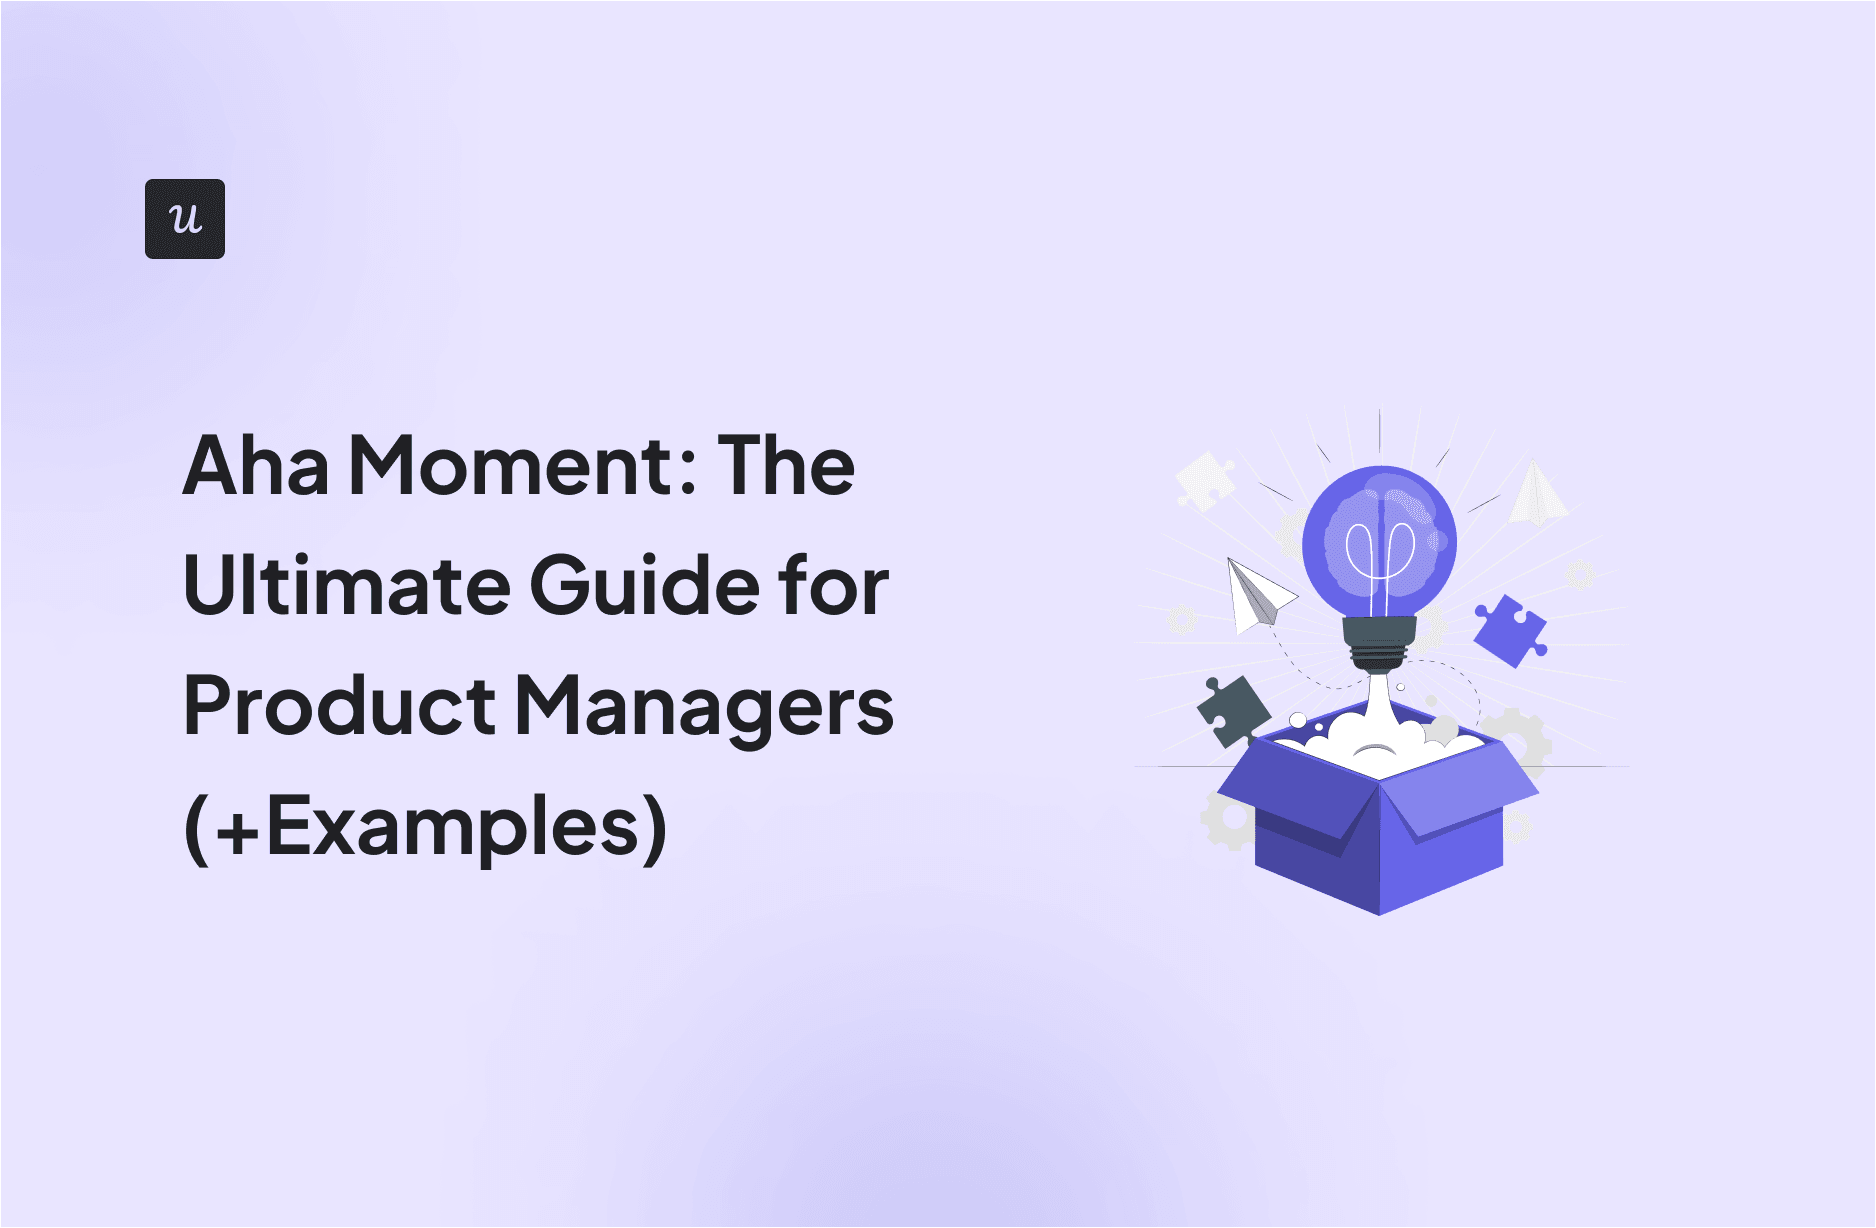 Aha Moment: The Ultimate Guide for Product Managers (+Examples) cover